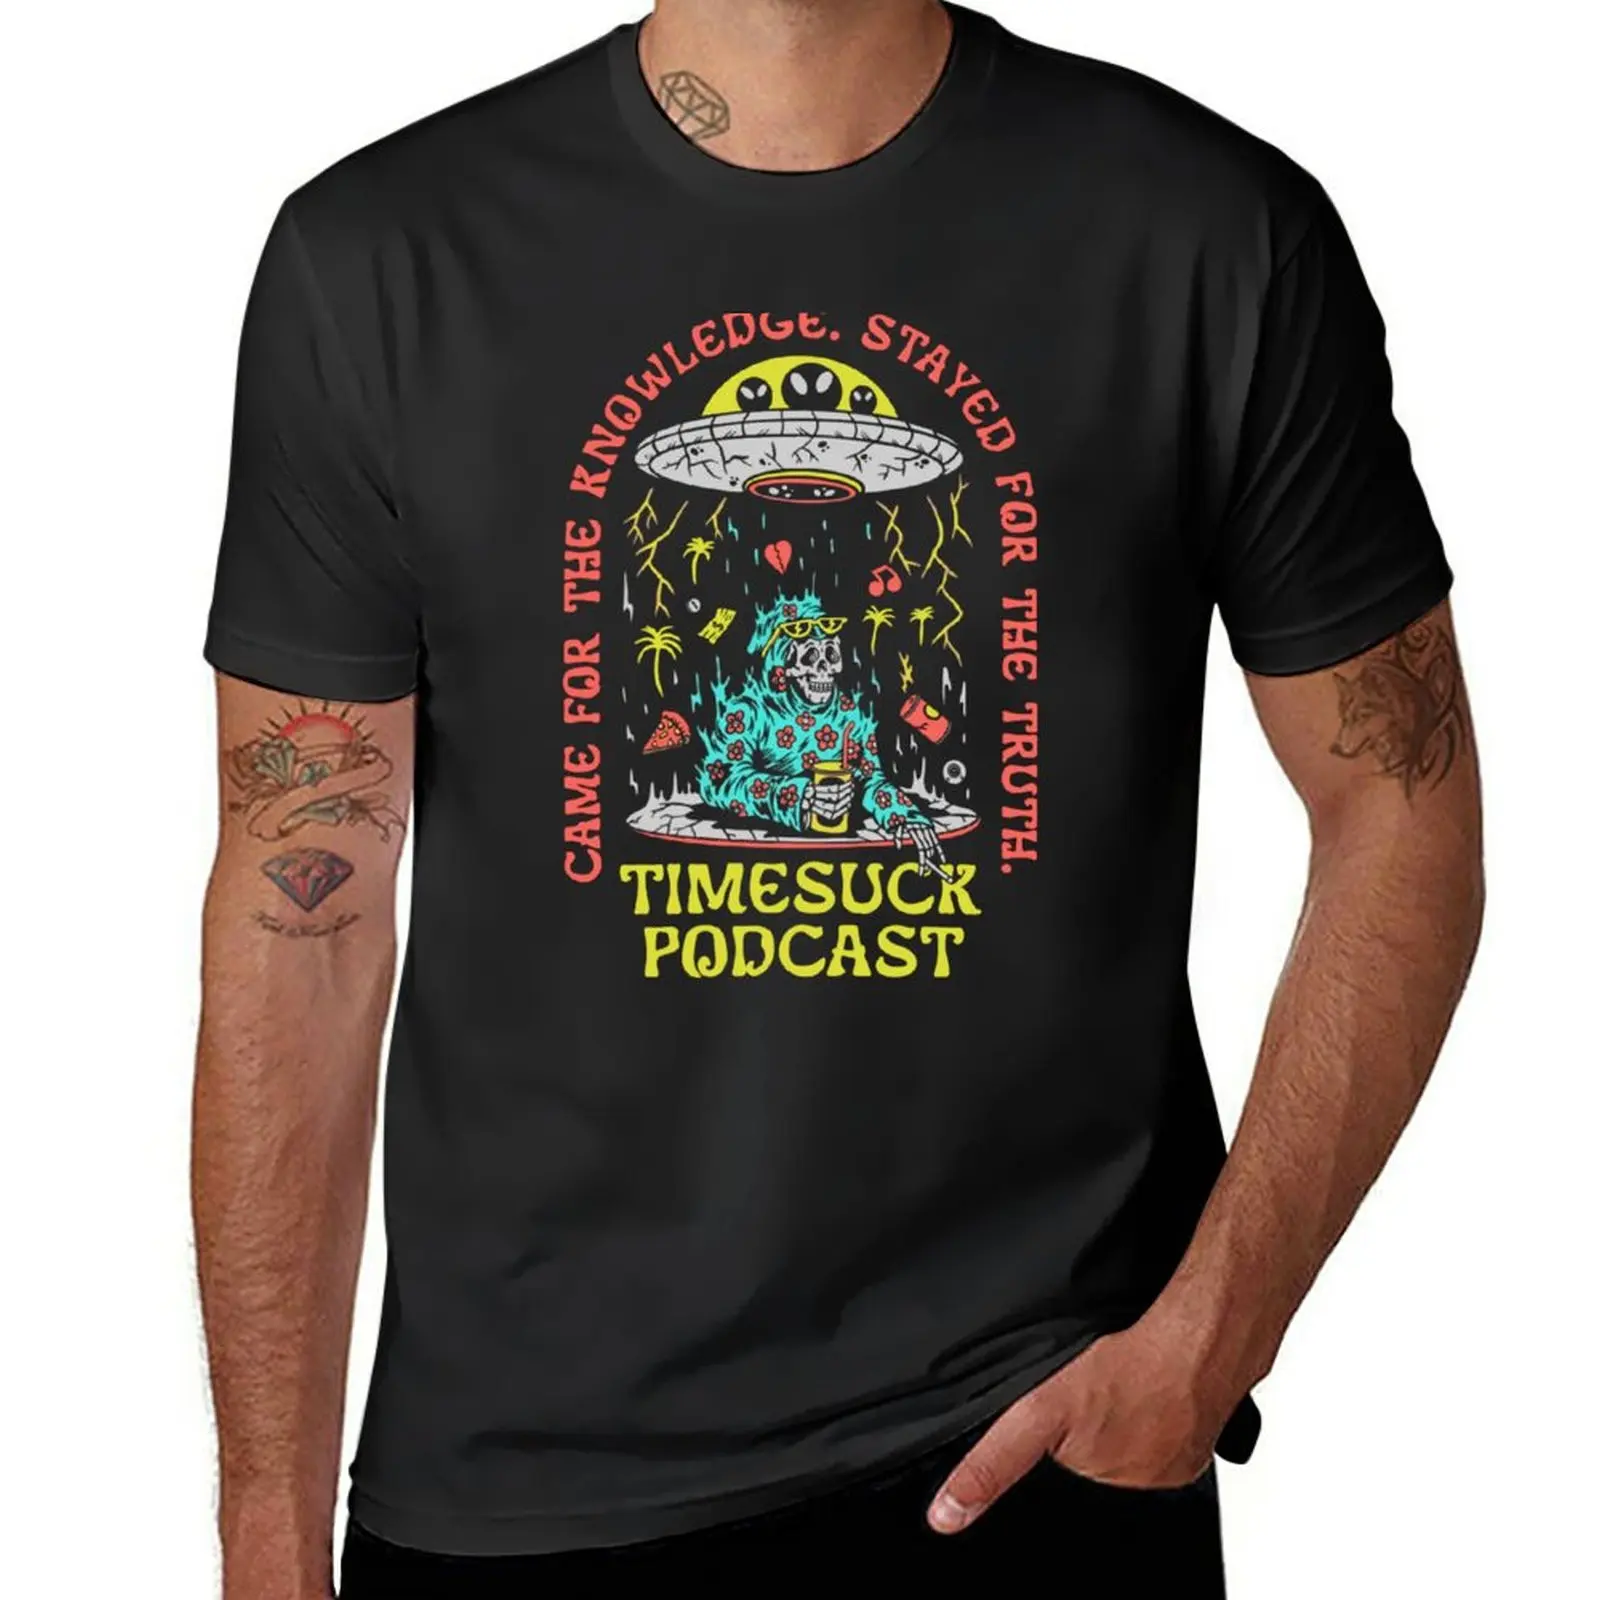 

New Timesuck Podcast m-erch Knowledge Truth 1 T-Shirt shirts graphic tees Tee shirt aesthetic clothes Men's cotton t-shirt